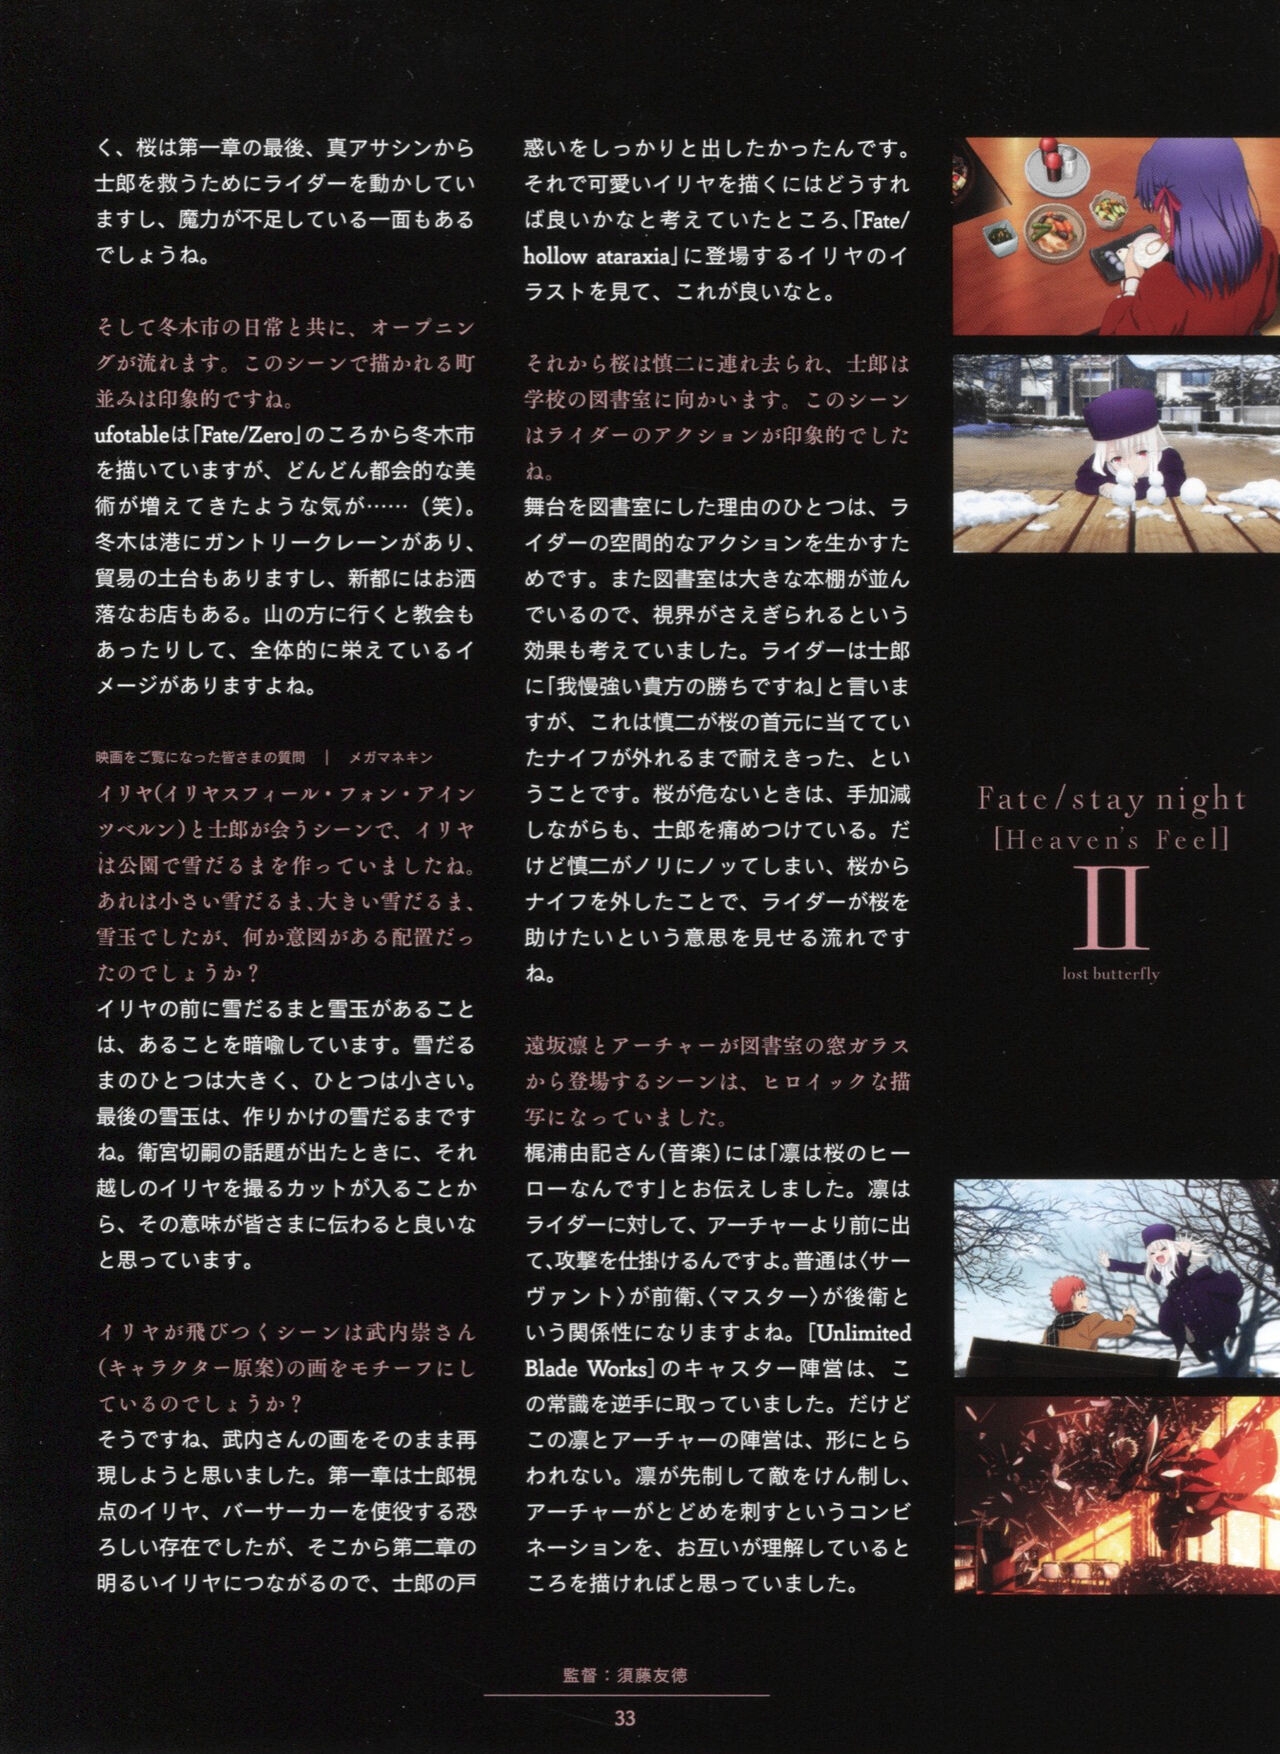 Fate/Stay Night: Heaven's Feel II - Lost Butterfly Animation Material 32